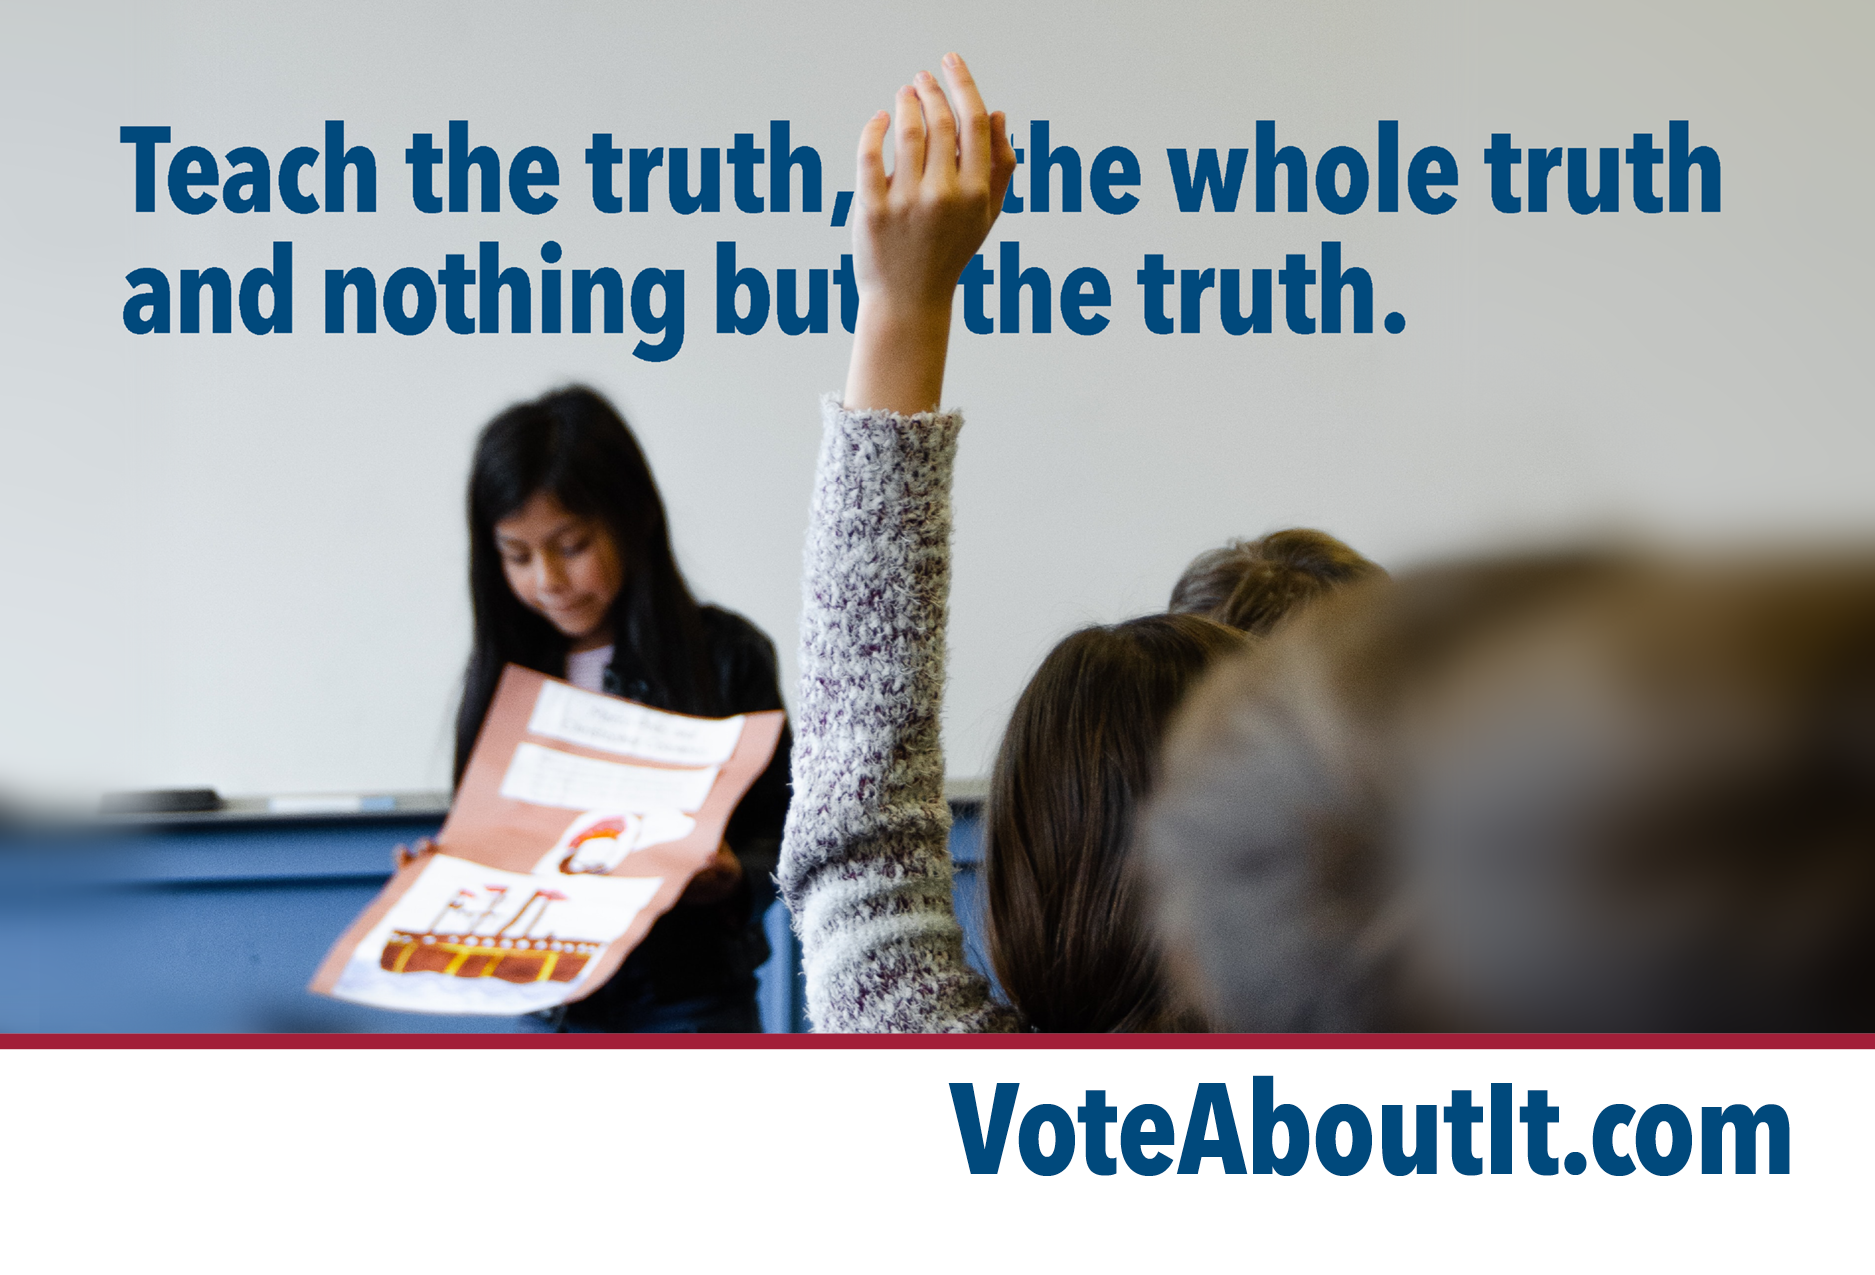 Teach the truth, the whole truth and nothing but the truth.